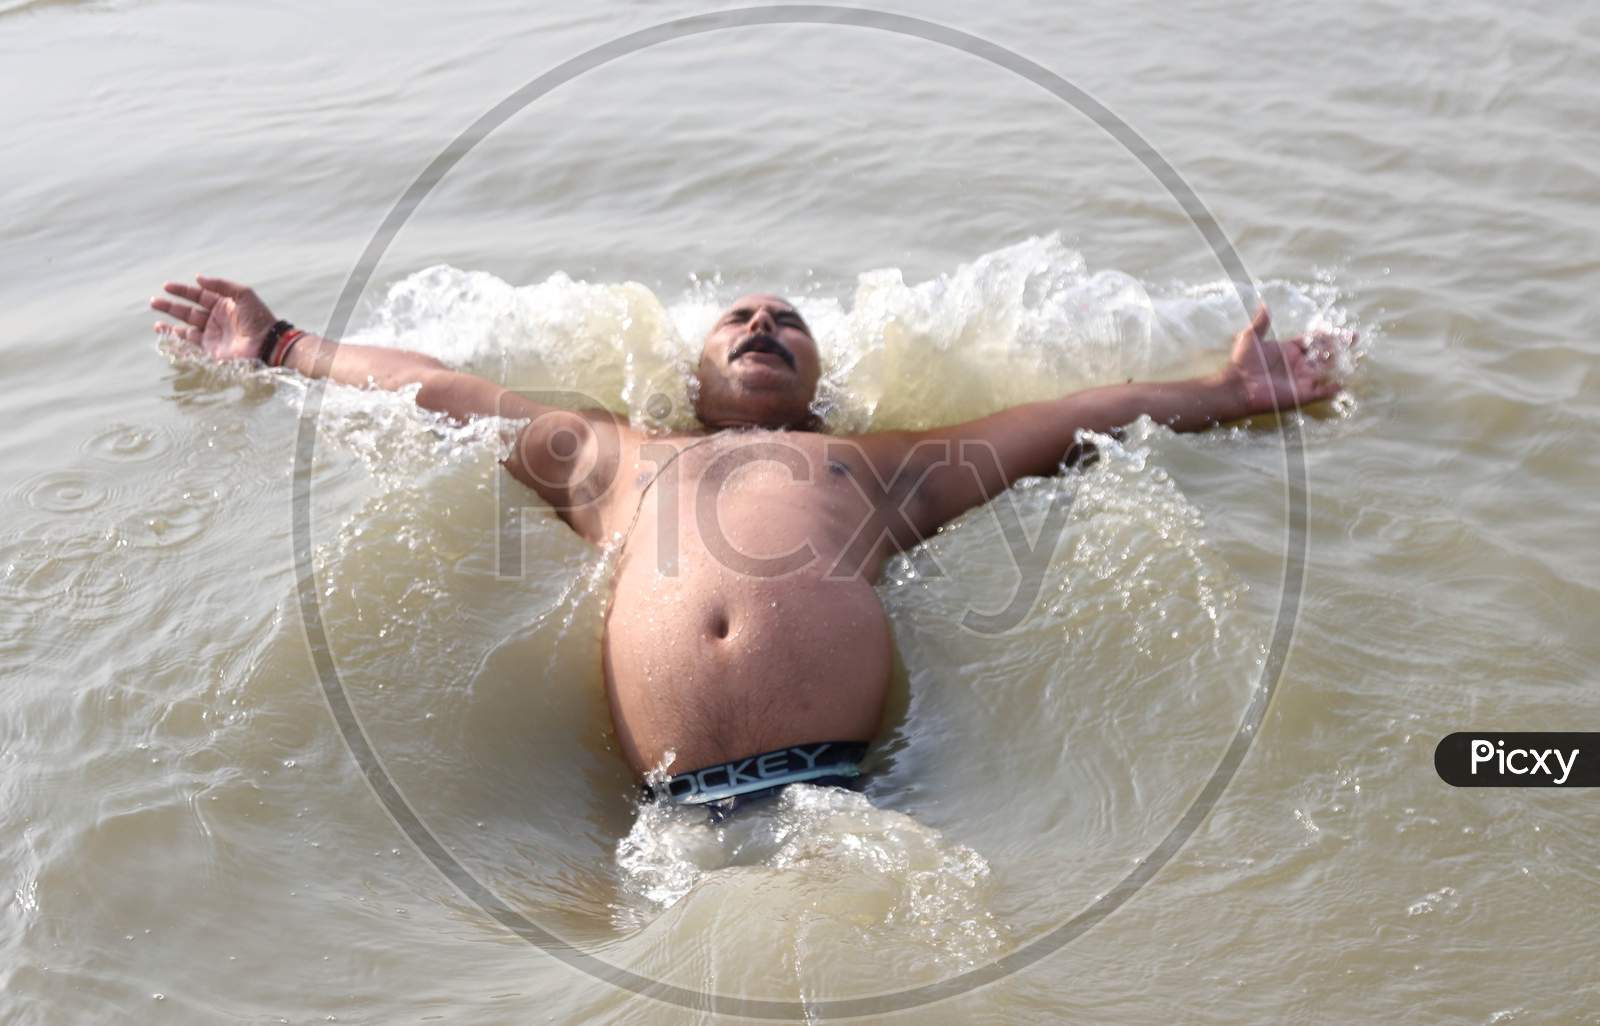 A Man Jumps In The River Ganga To Beat The Heat On A Hot Day In Prayagraj, June 10, 2020.